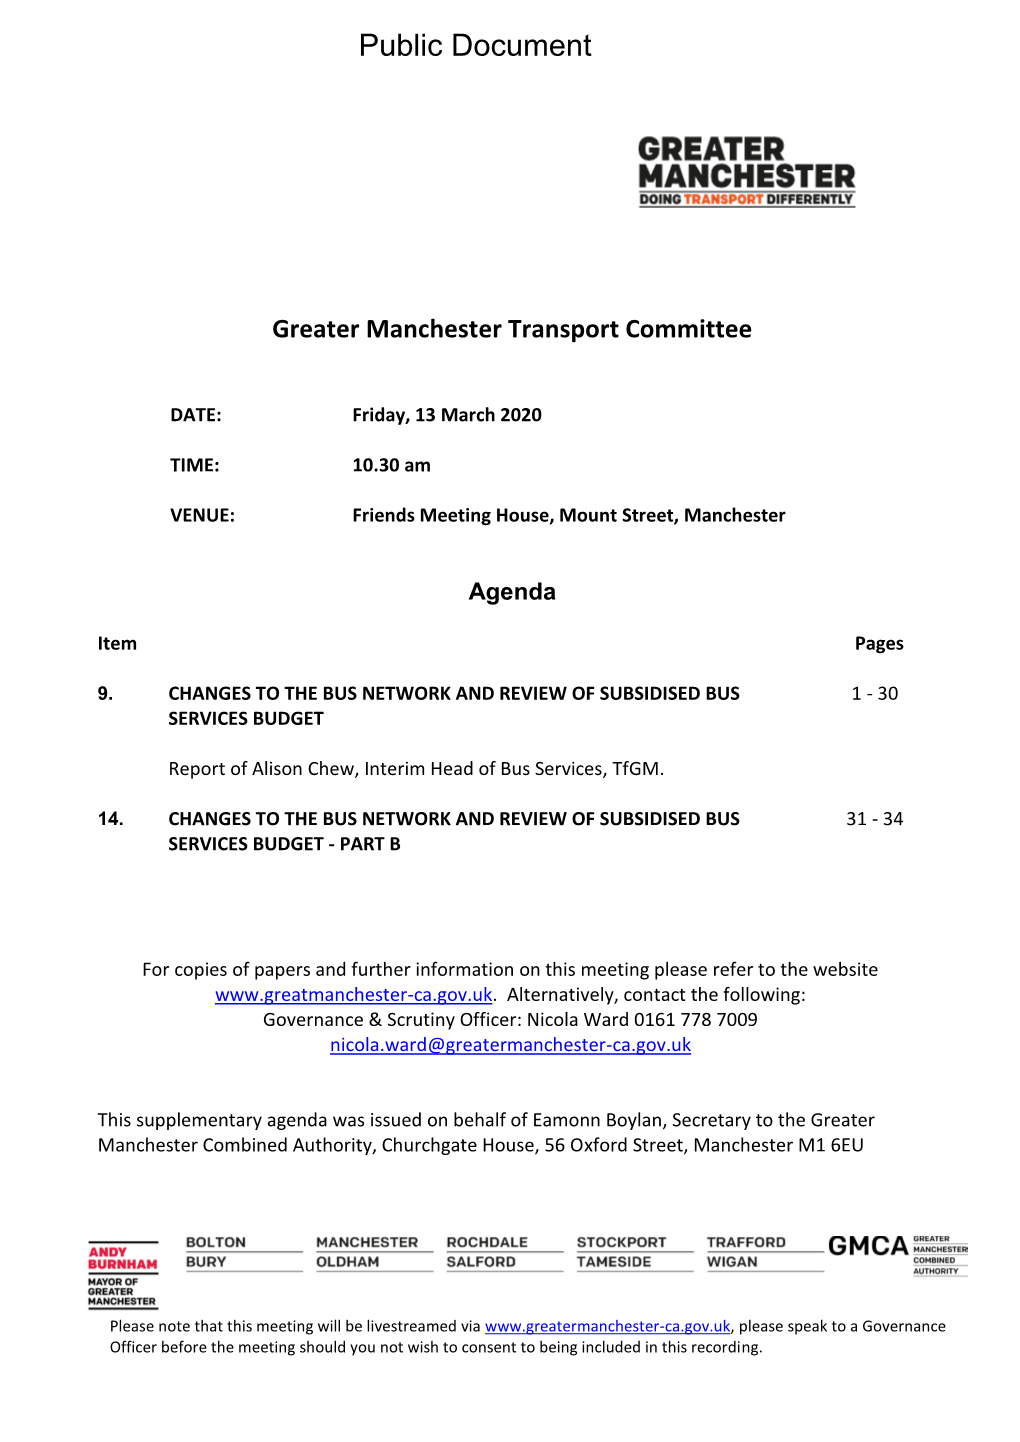 GM Transport Committee Overview & Scrutiny Committee N/A N/A